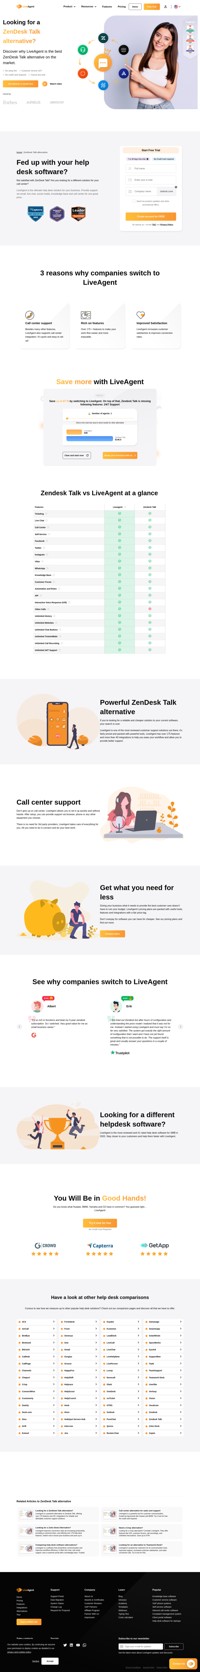 Liveagent is the ultimate help desk solution for your business. Liveagent provides support via email, live chat, social media, knowledge base and call center for one great price. Choose one from our three paid plans or pick out separate features to customize your help desk.